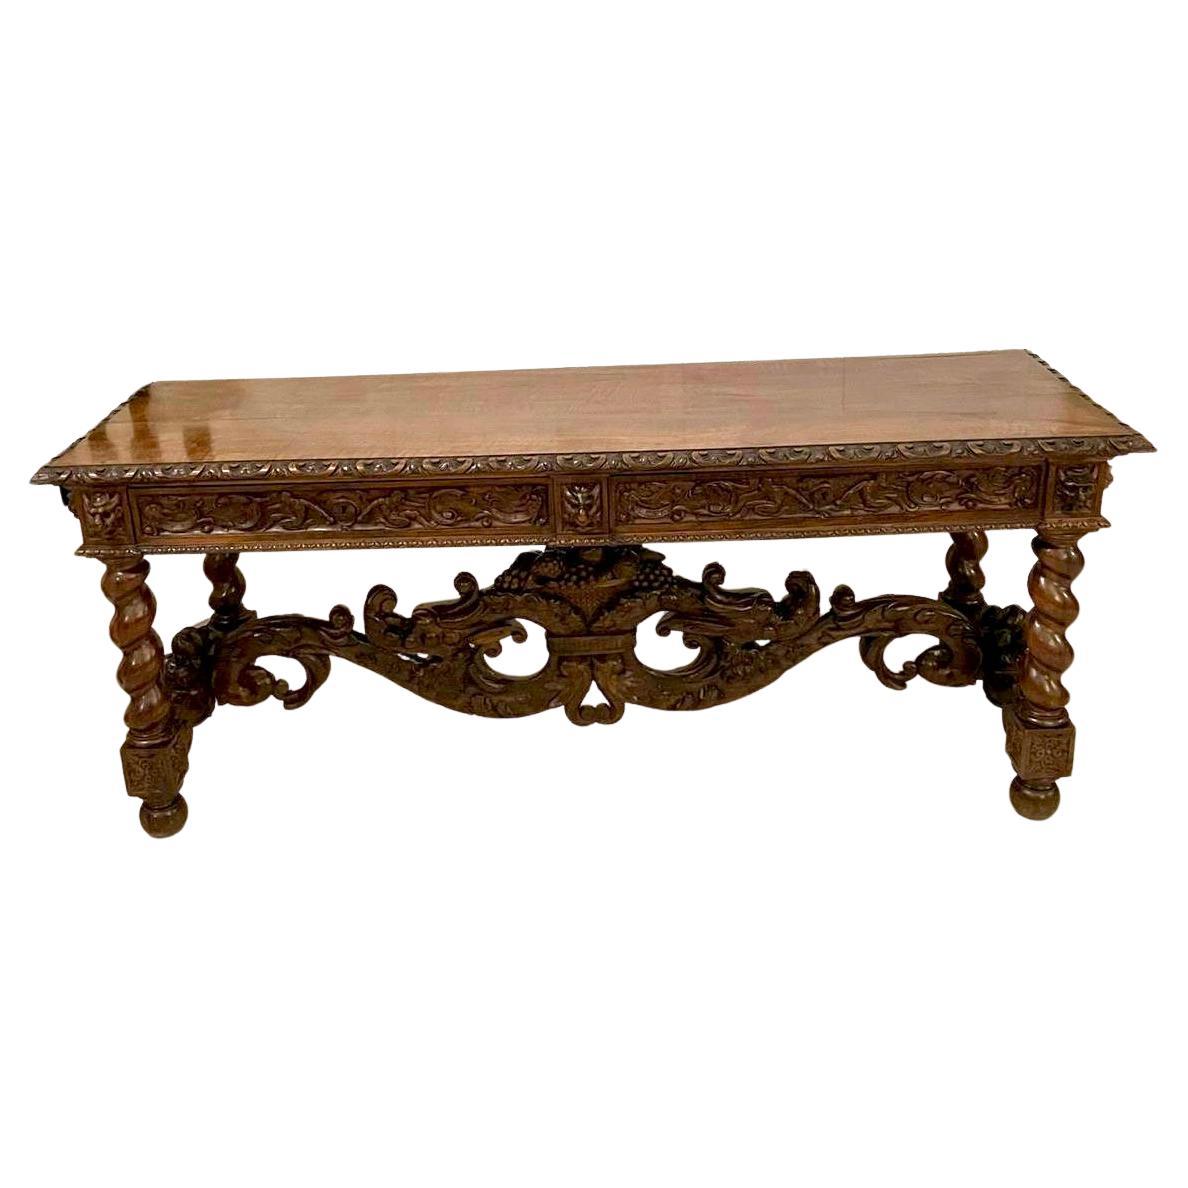 Exhibition Quality Antique Italian Carved Solid Walnut Serving/Console Table For Sale